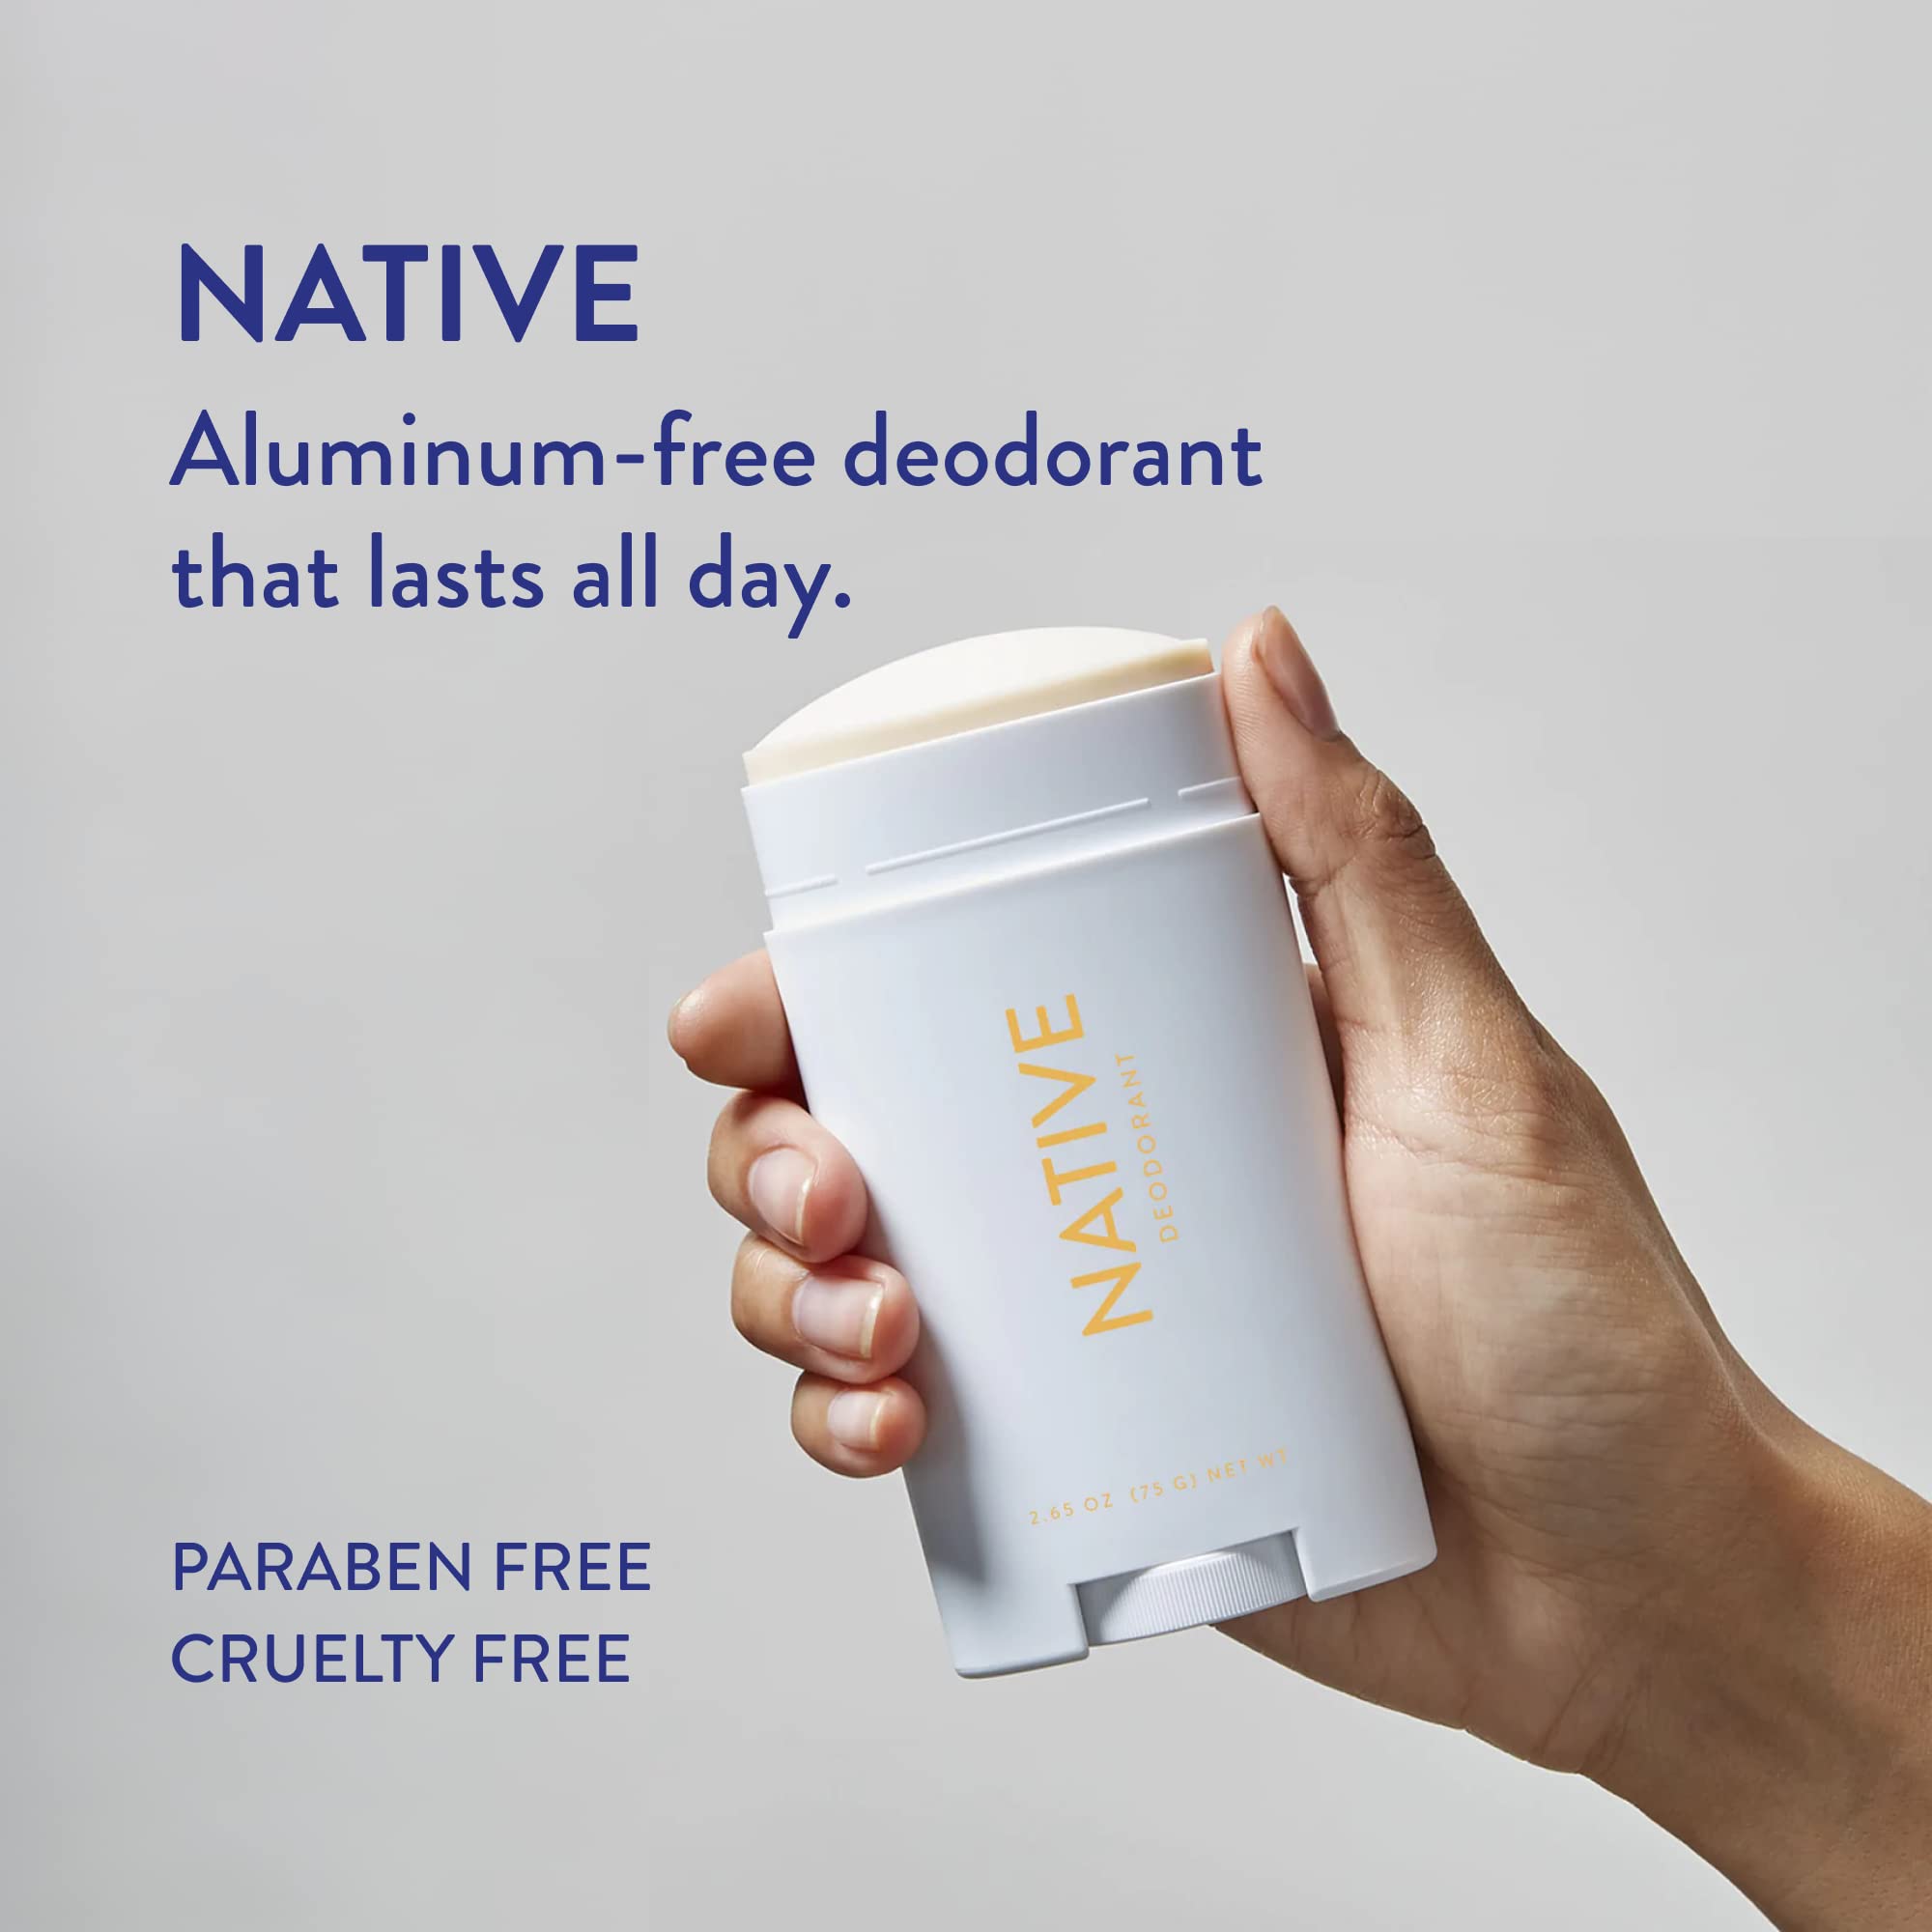 Native Deodorant | Natural Deodorant Seasonal Scents for Women and Men, Aluminum Free with Baking Soda, Probiotics, Coconut Oil and Shea Butter | Buttercream & French Vanilla